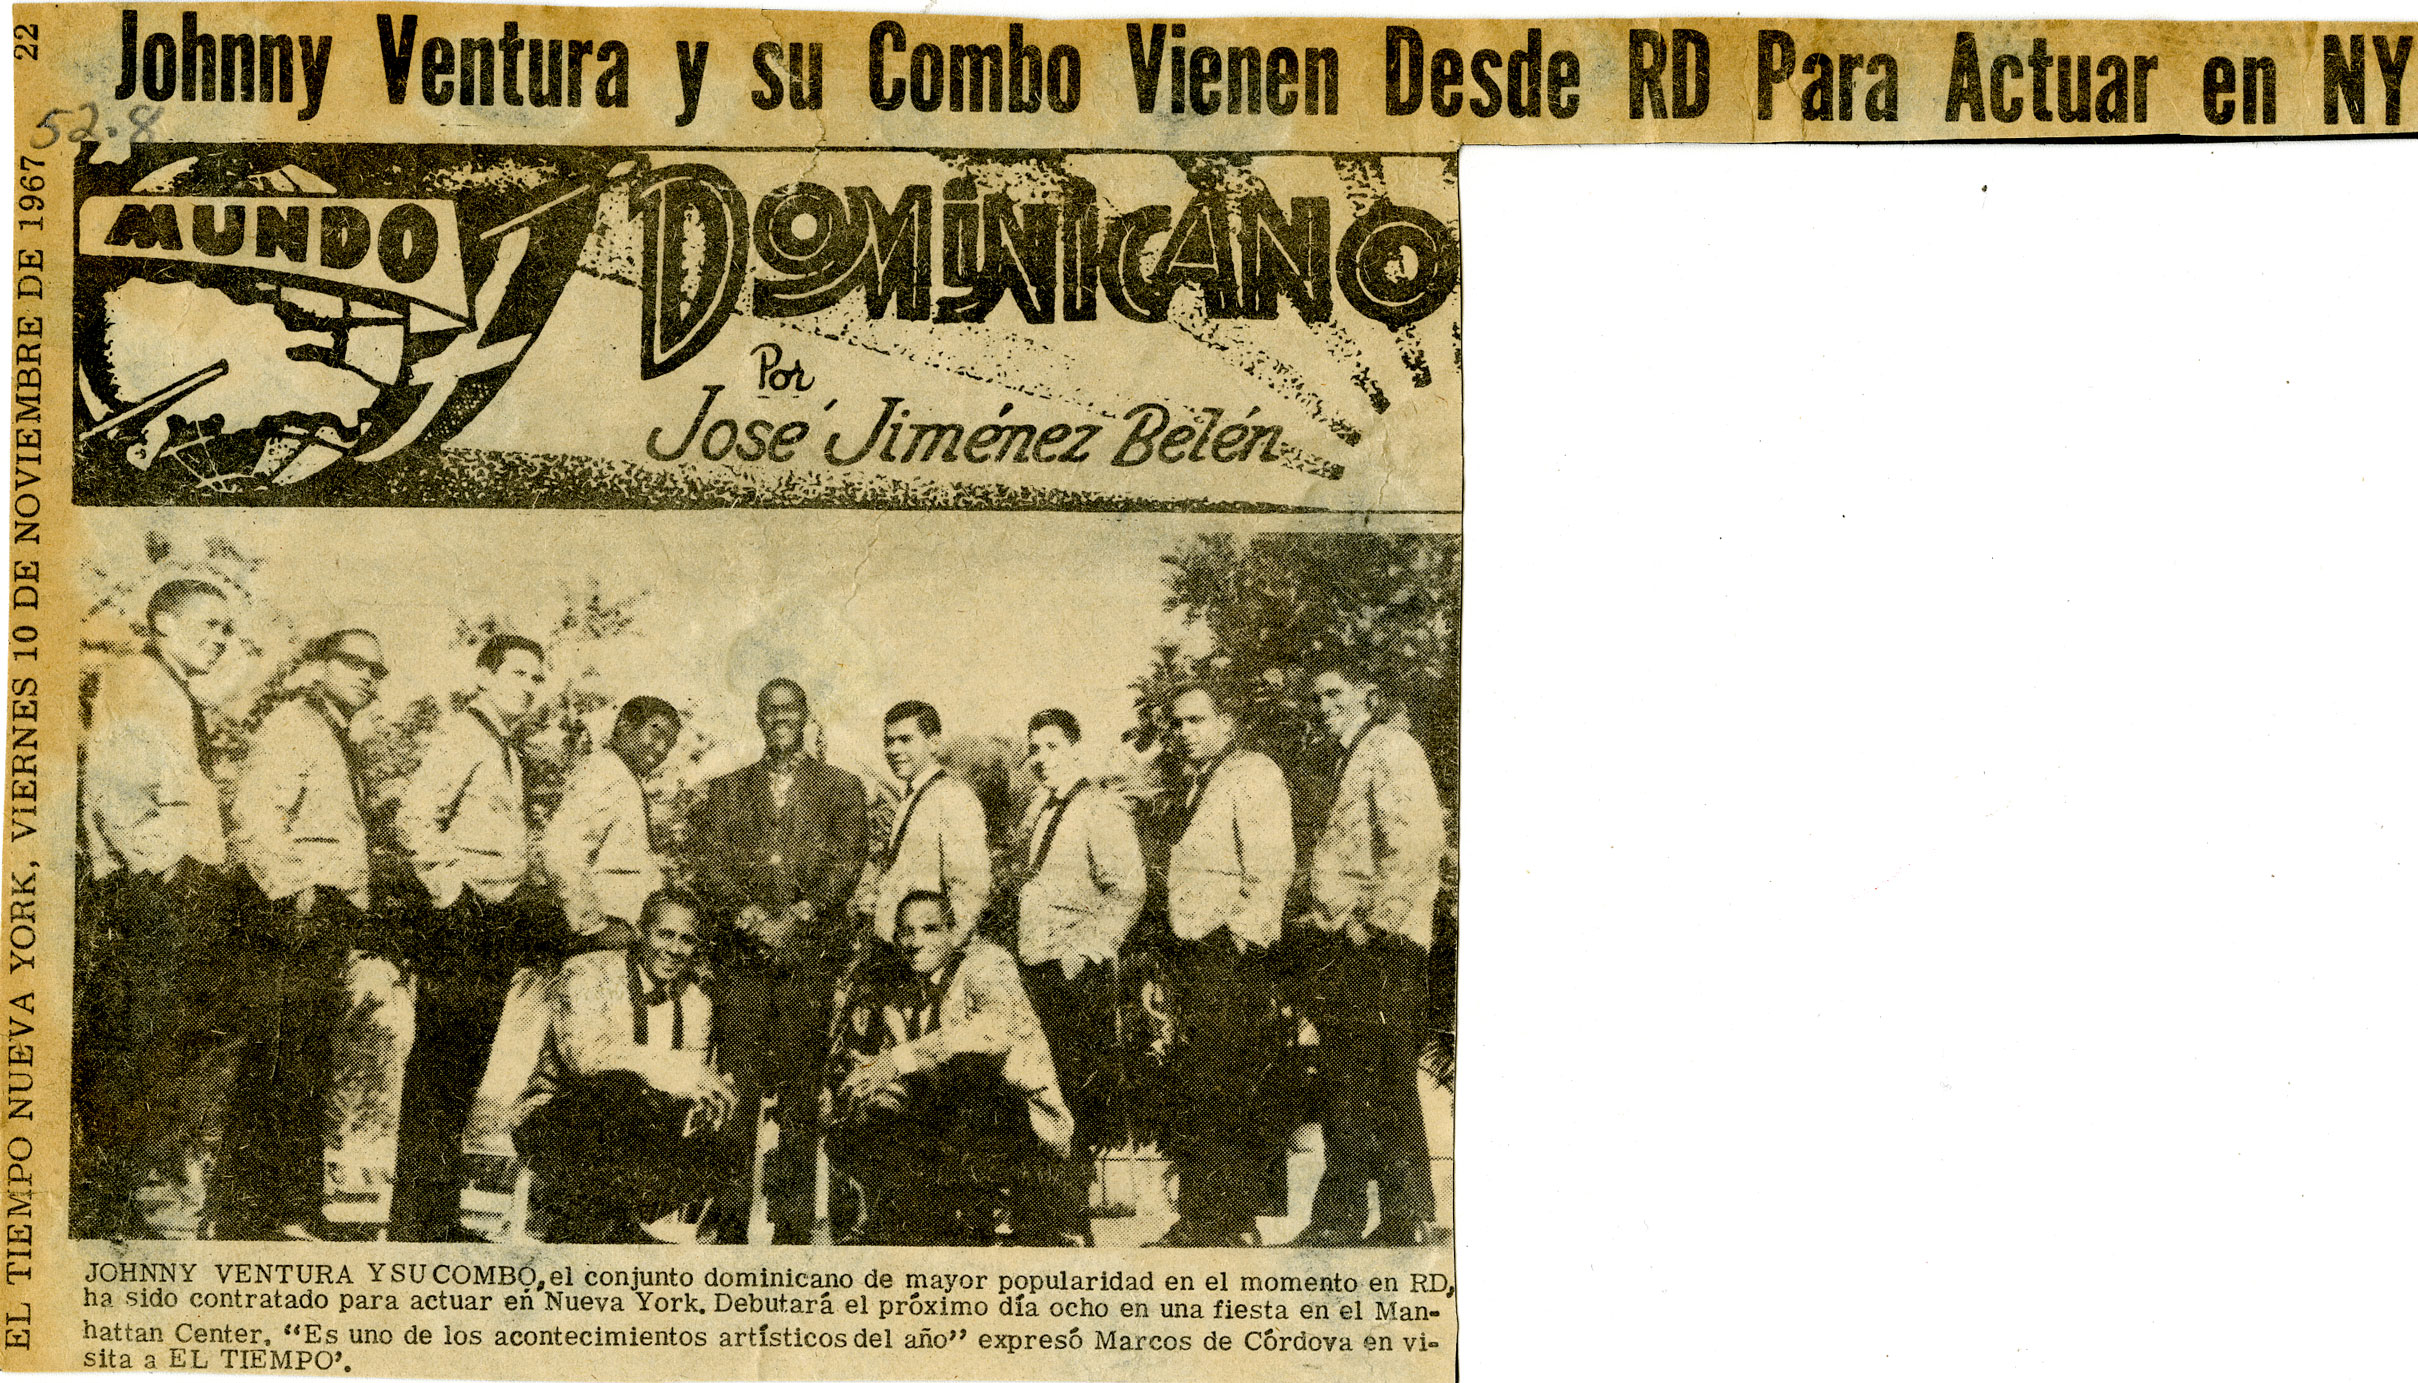 Johnny Ventura y su Combo come from DR to perform in NYC, November 10,1967